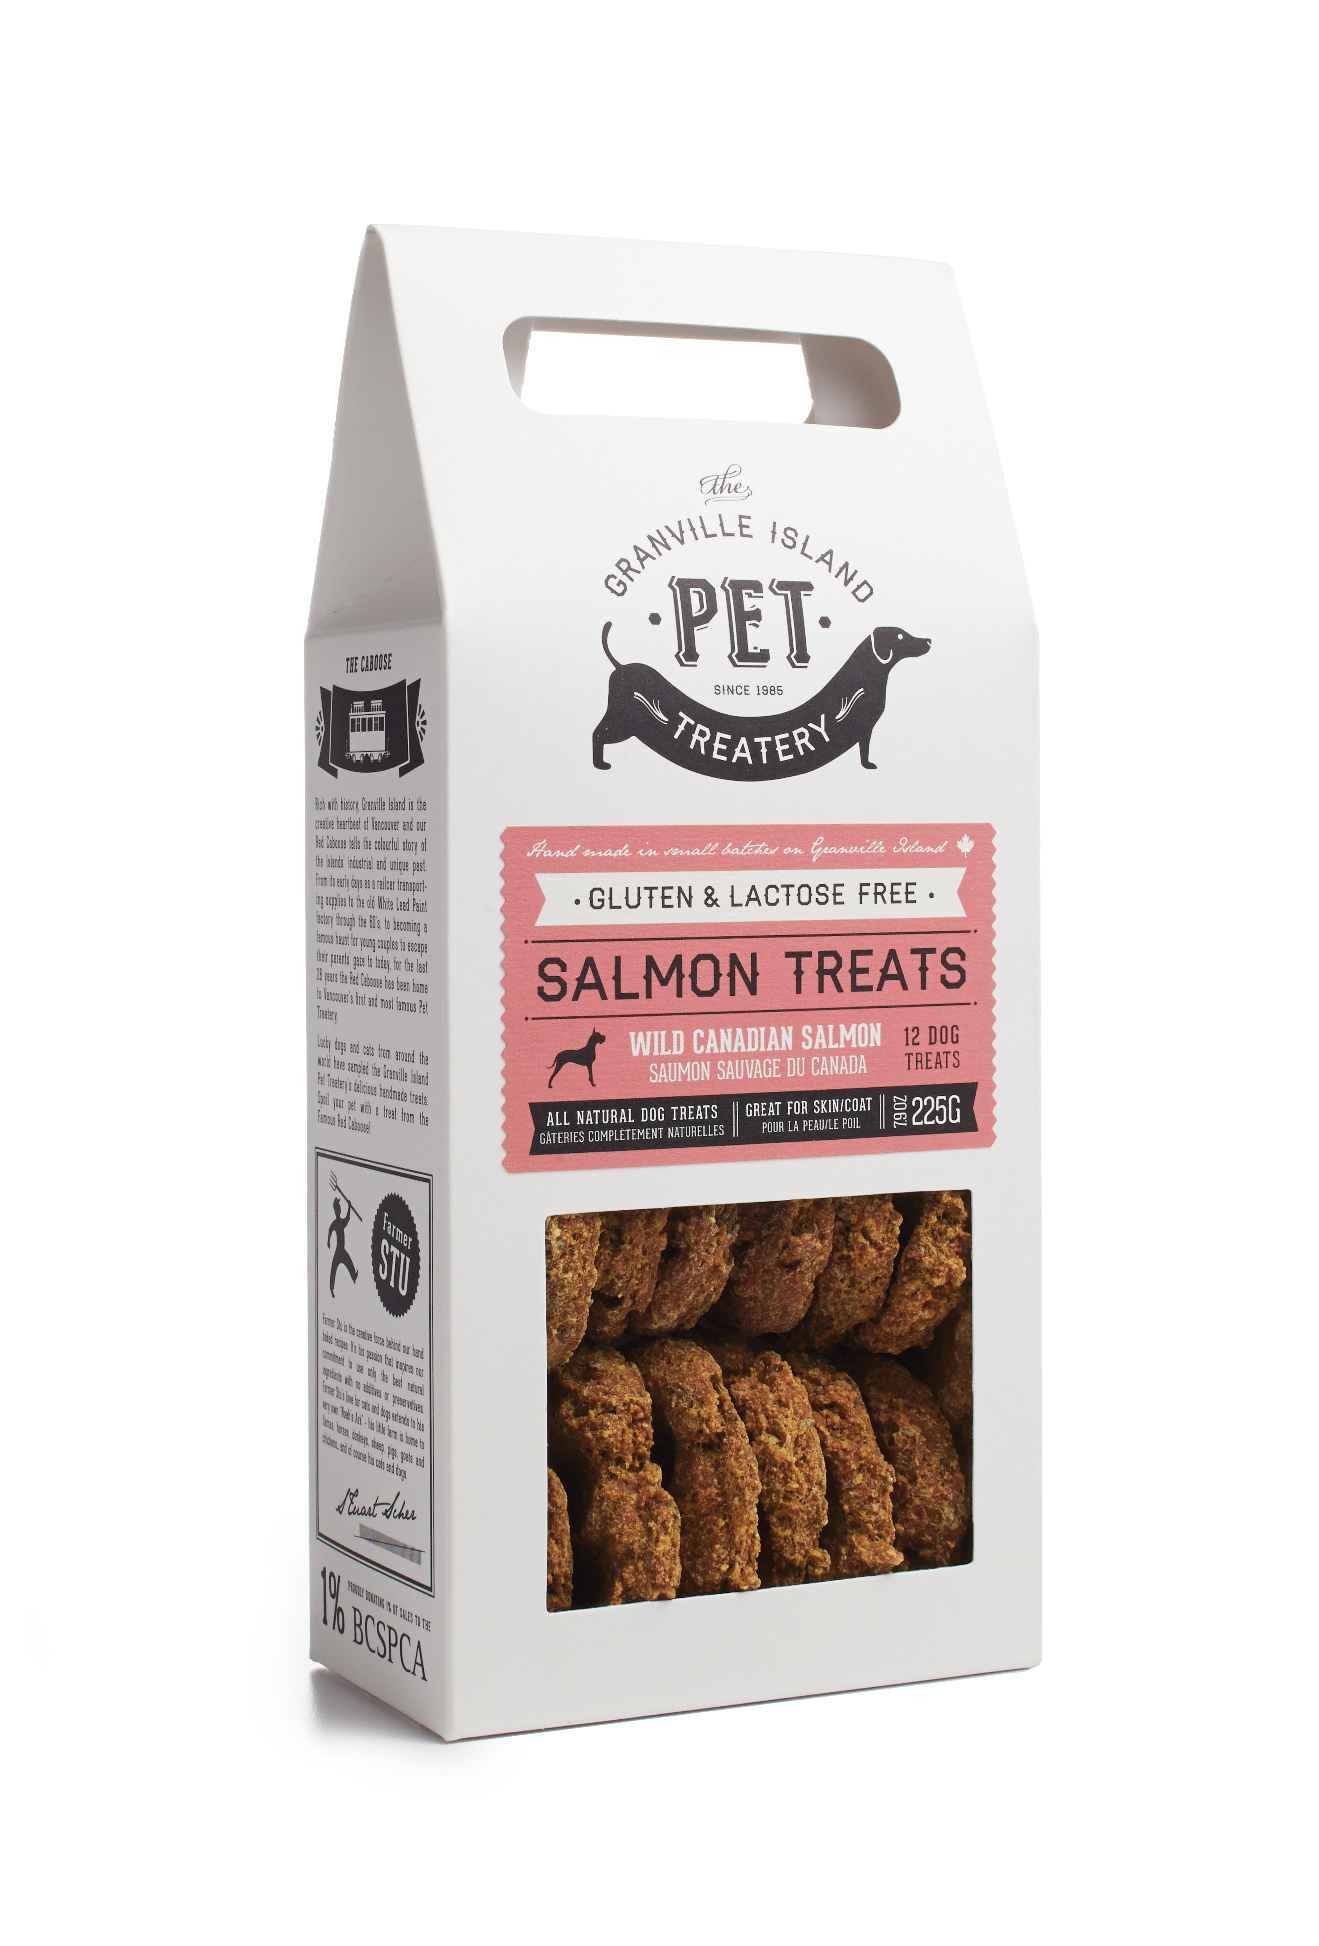 Packaging and branding for pet food brand Granville Island Pet Treatery.